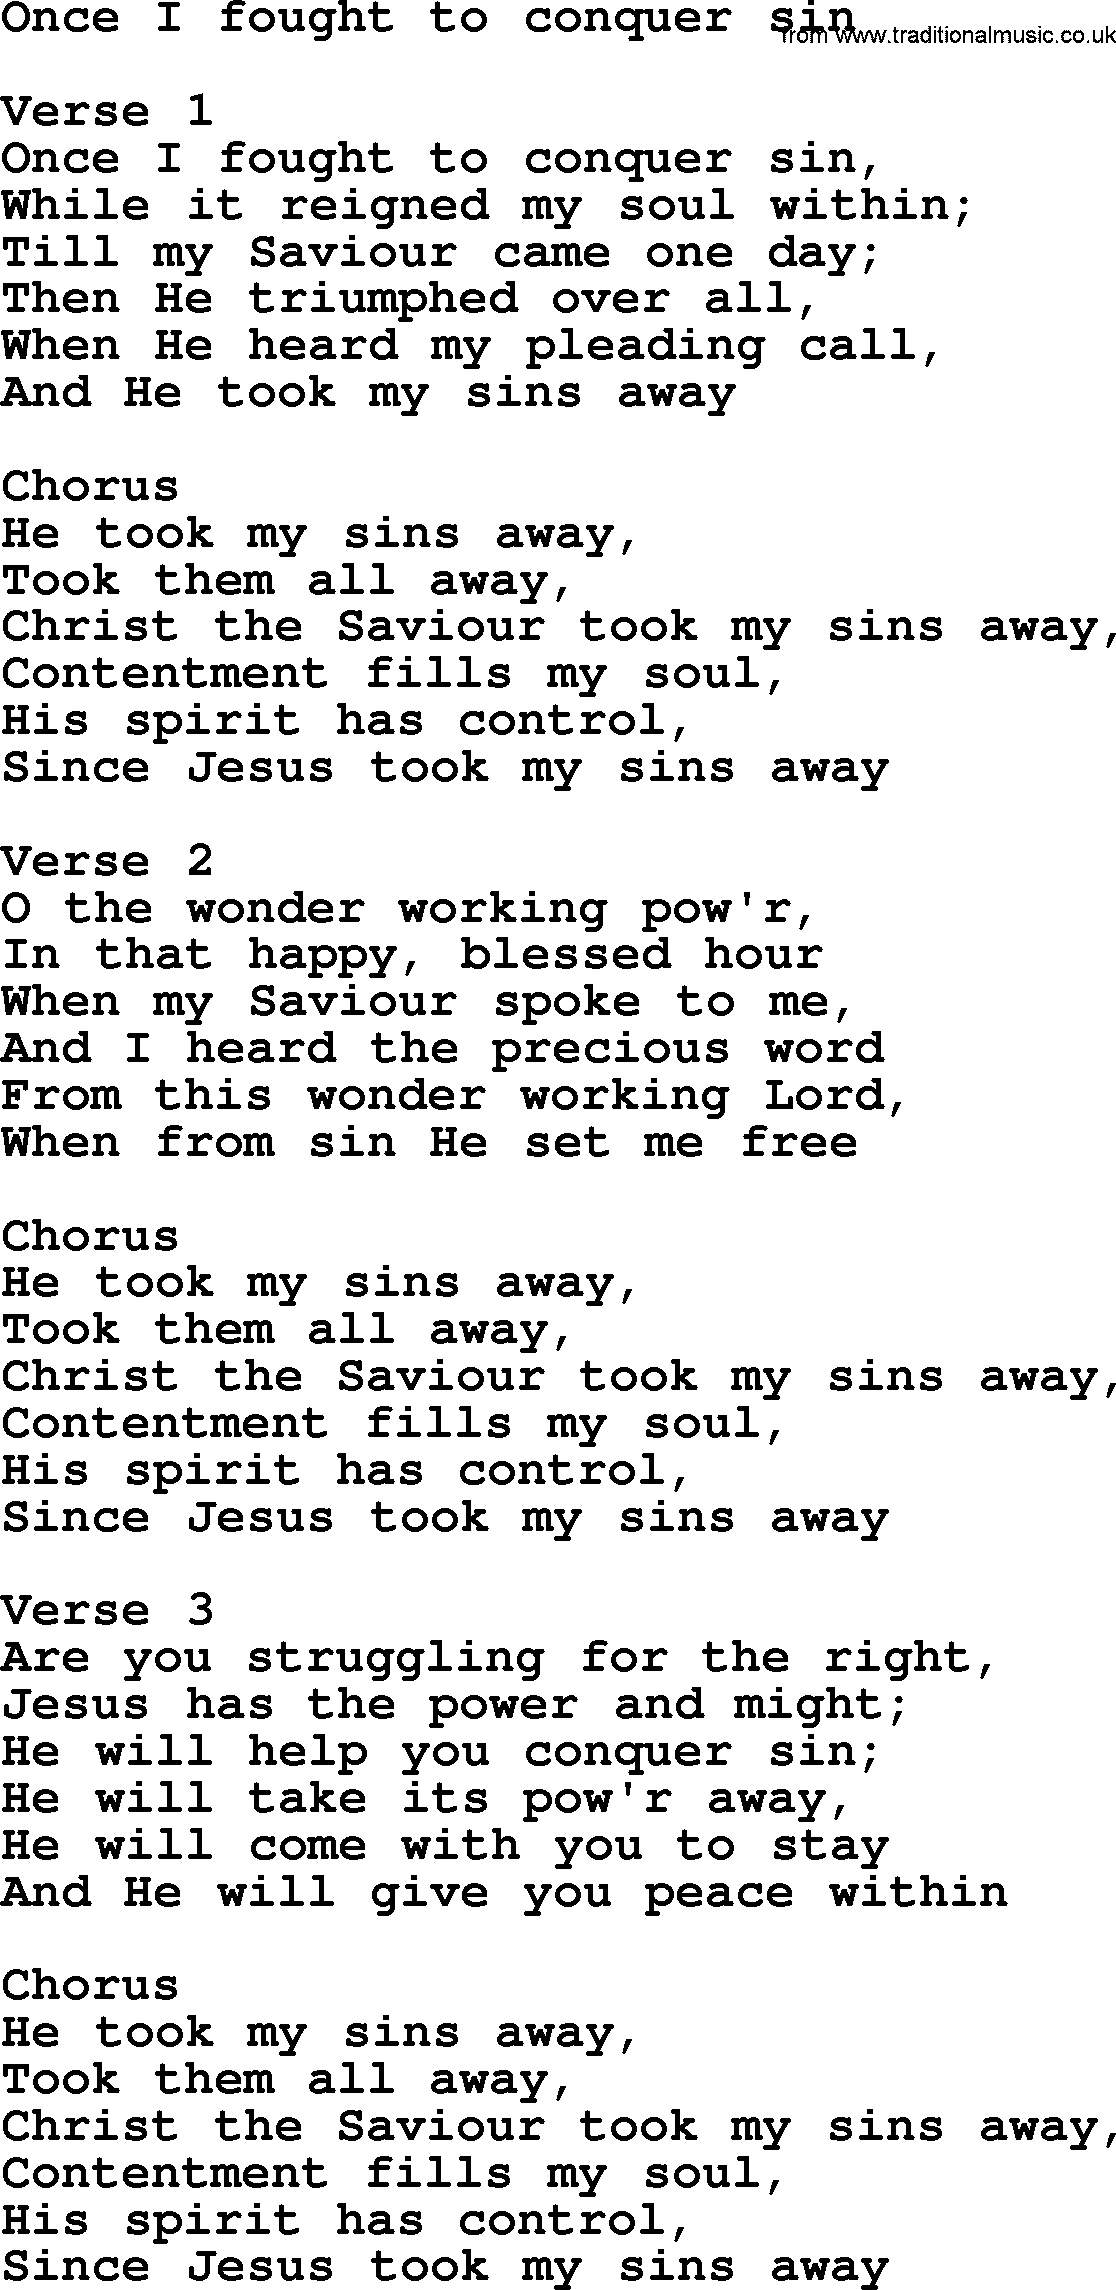 Apostolic and Pentecostal Hymns and Gospel Songs, Hymn: Once I Fought To Conquer Sin, Christian lyrics and PDF